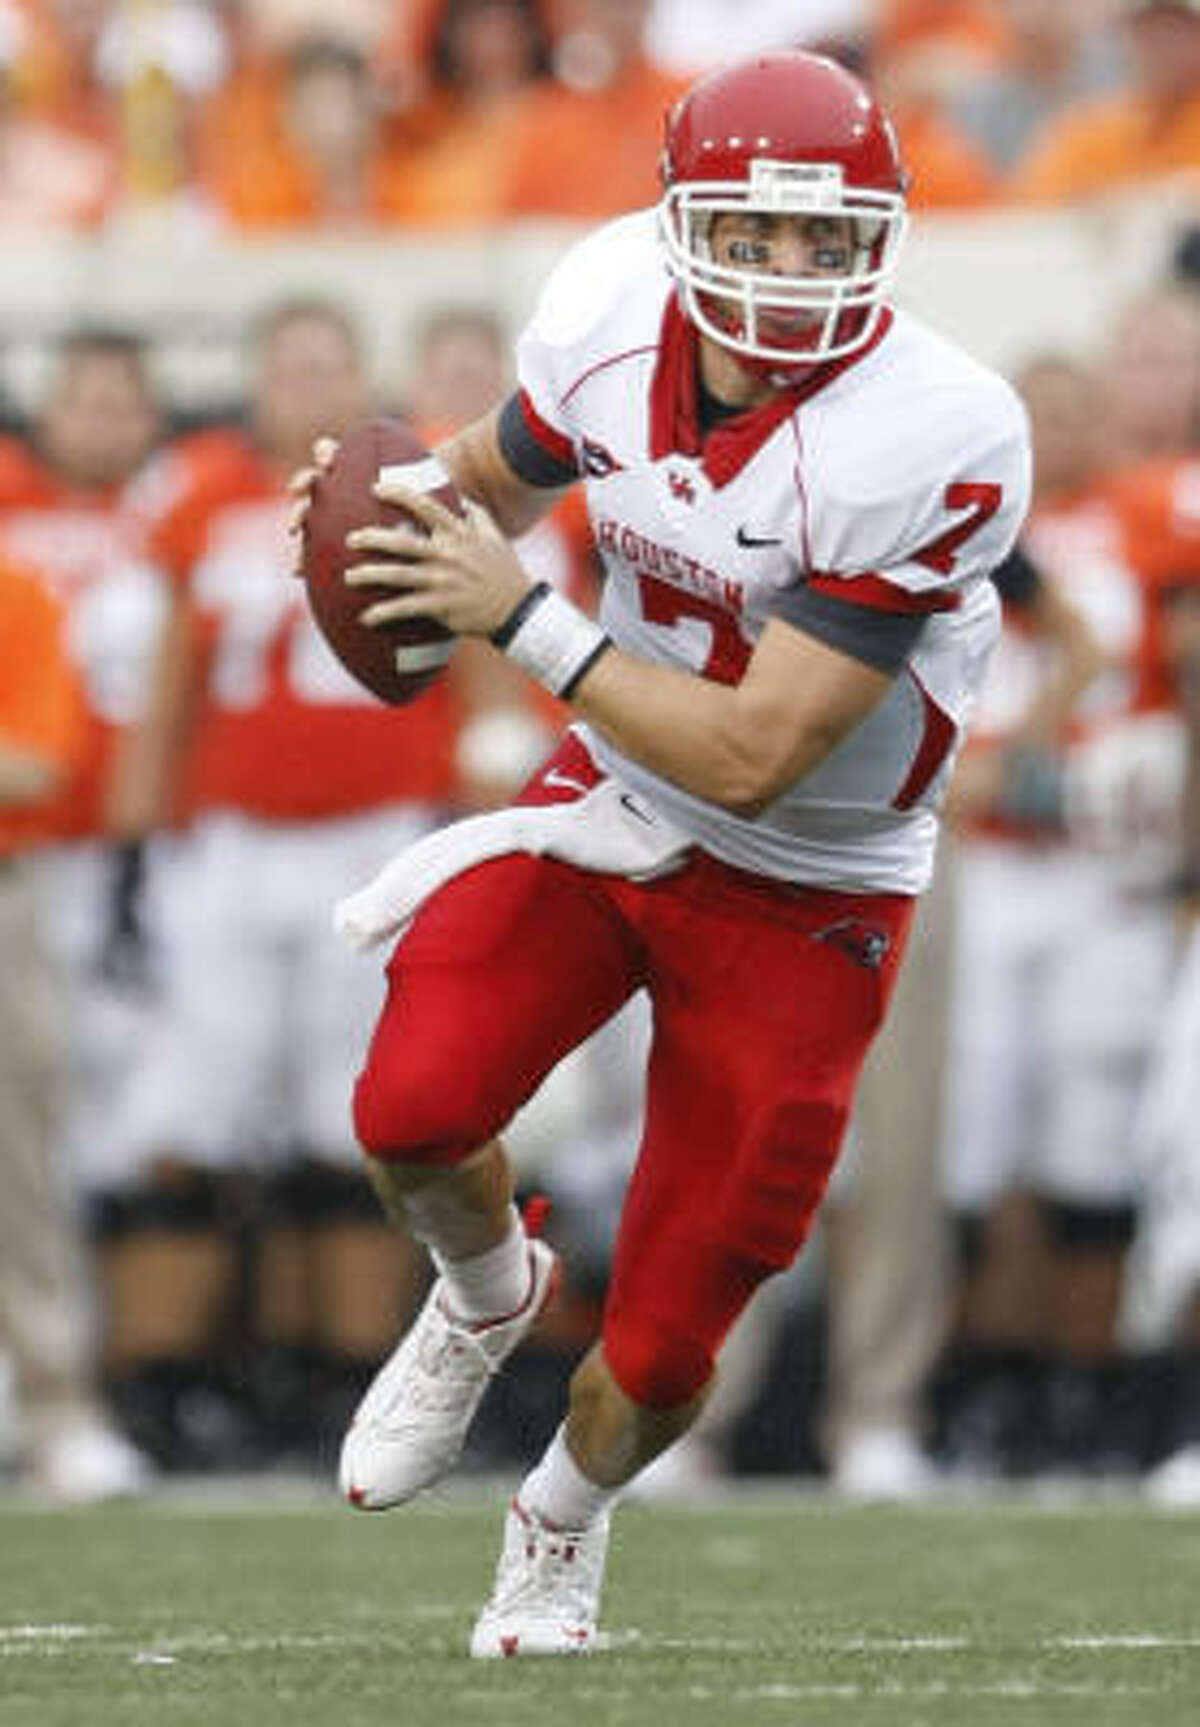 UH quarterback Case Keenum has drawn praise from all over the locker room and looks to lead the Cougars to a 3-0 start.